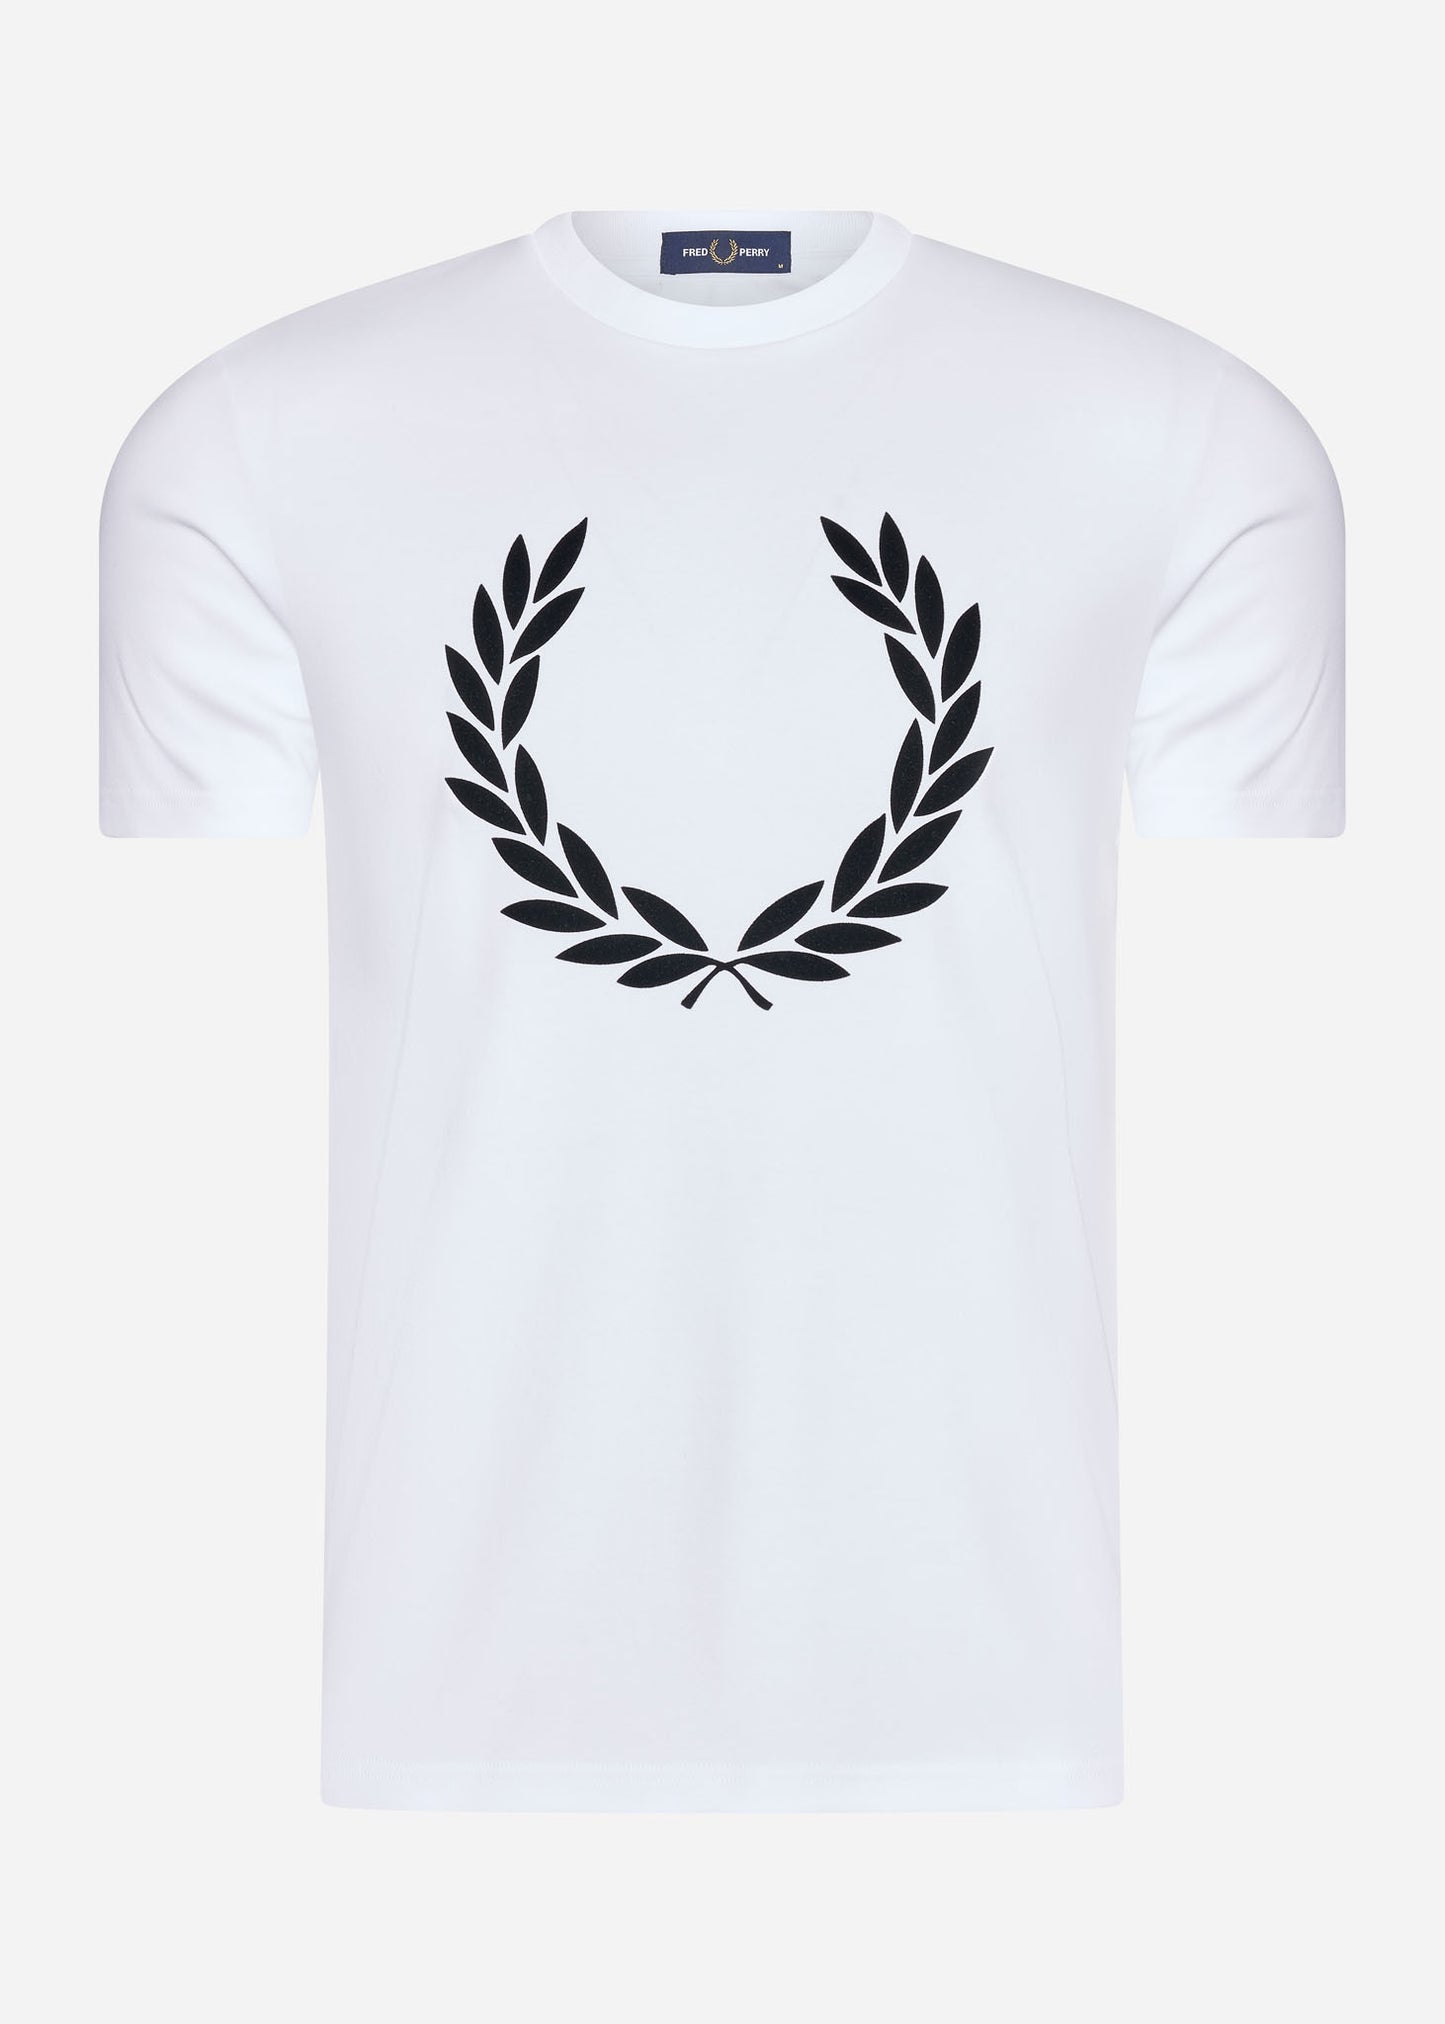 Fred Perry T-shirts  Flock laurel wreath t-shirt - white 